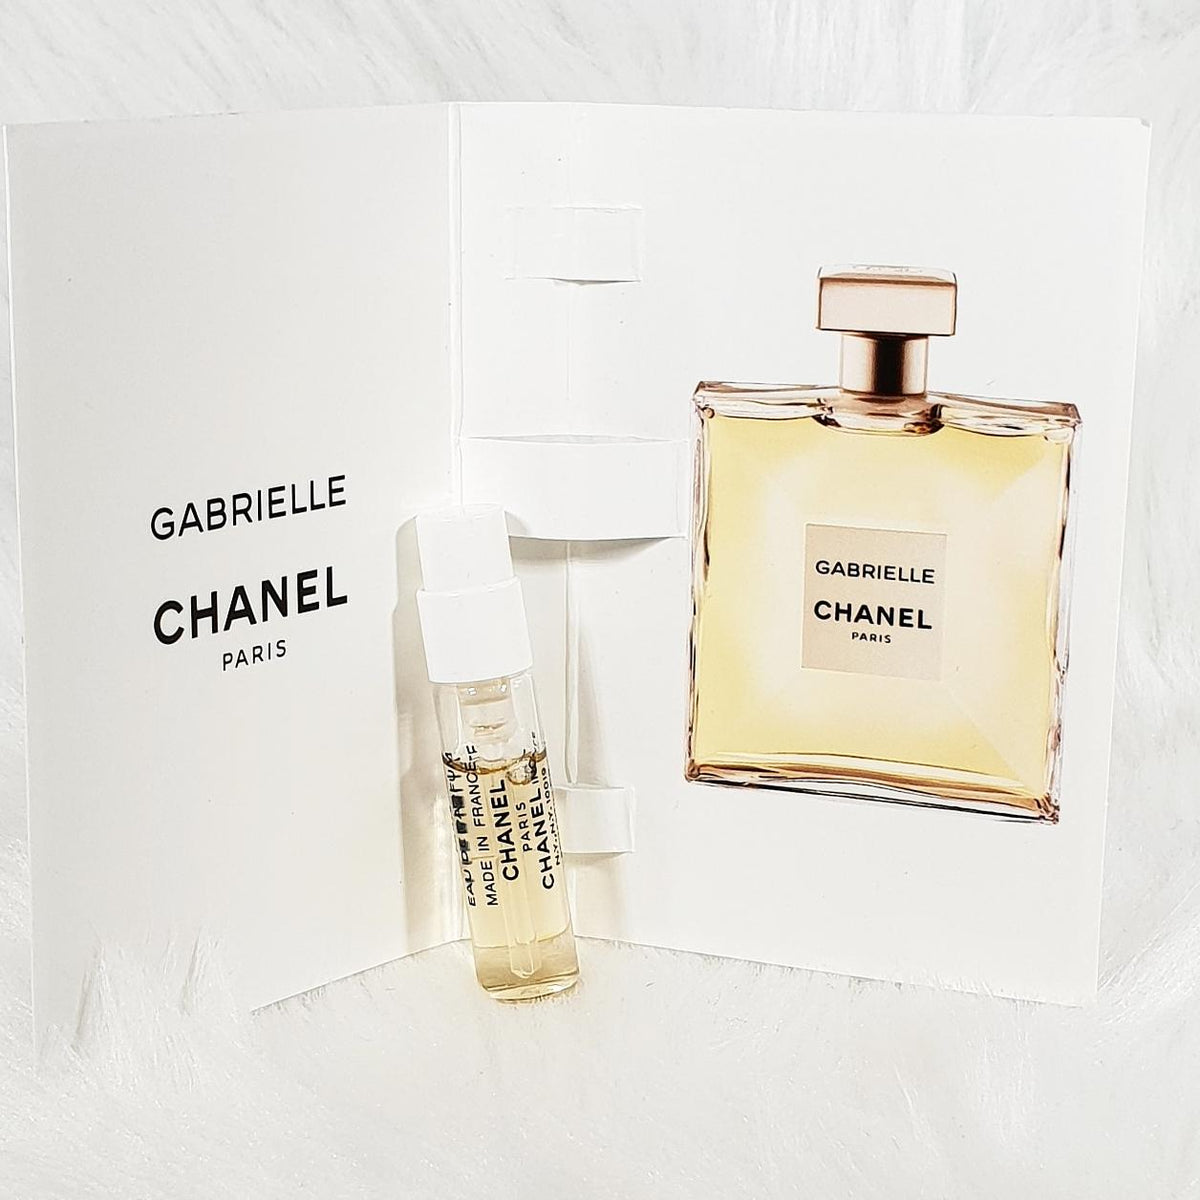 18 Perfume Gift For When You Don't Know Their Scent